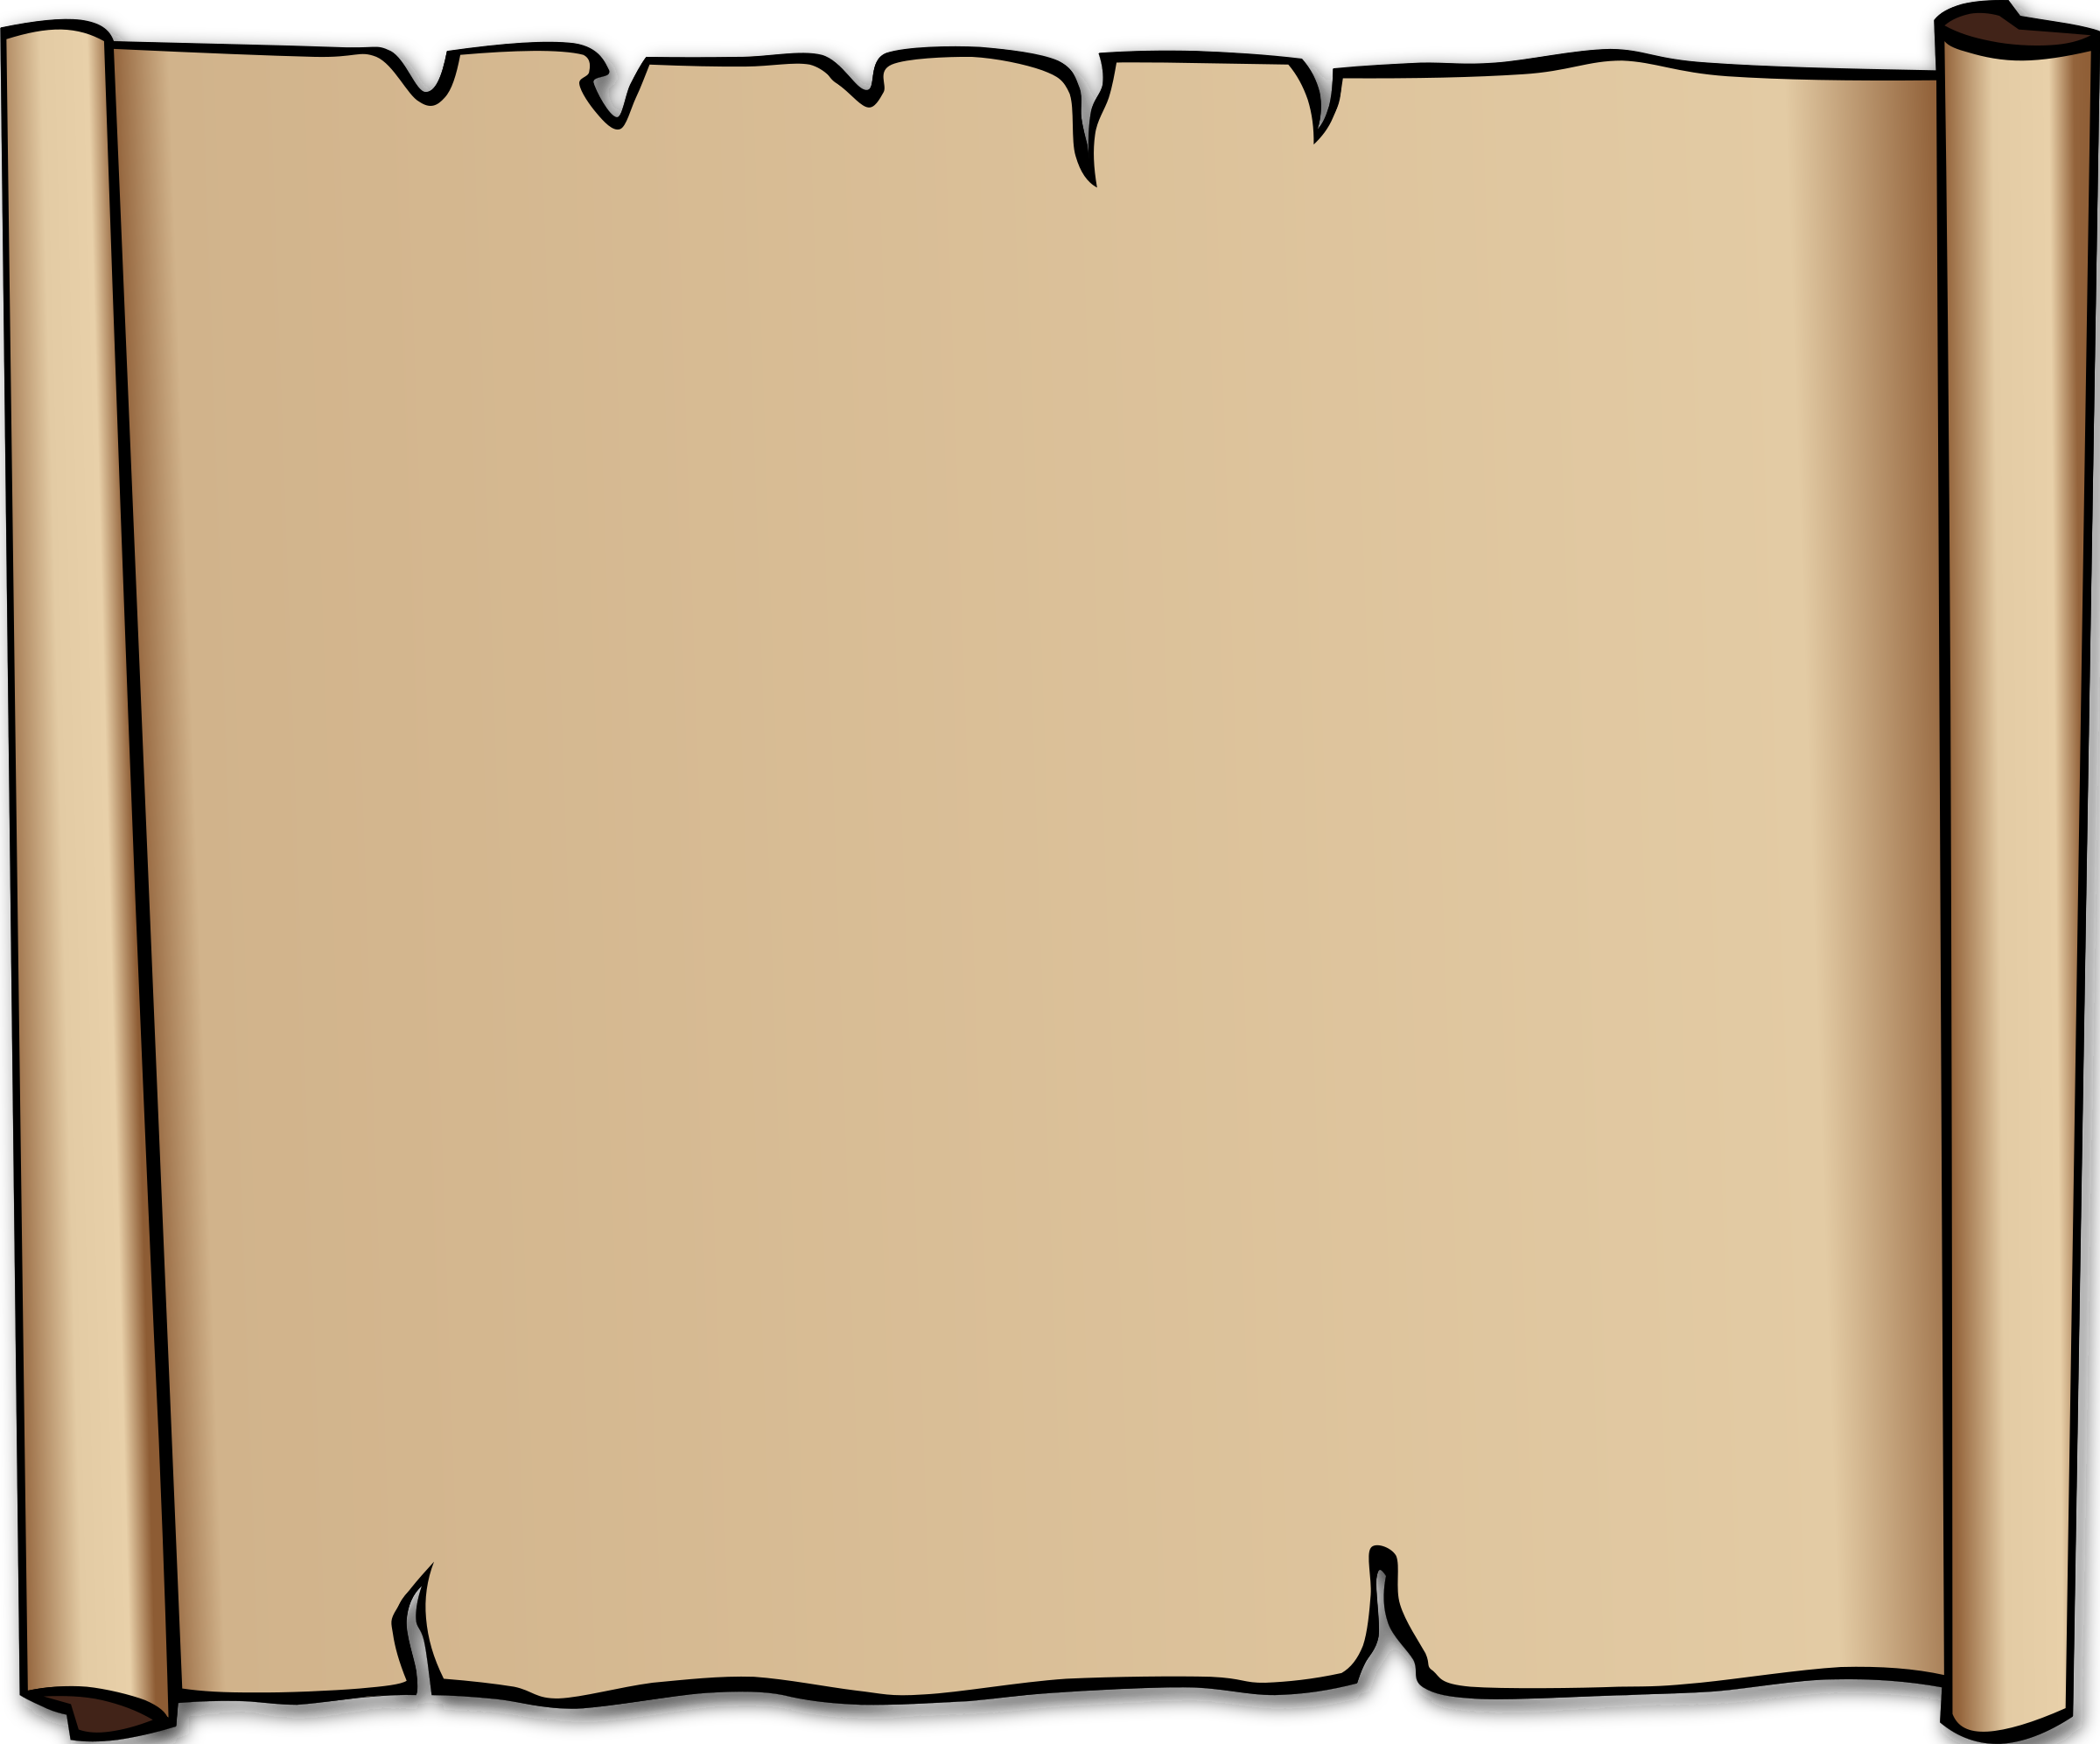 Parchment Background Or Border By Gerald G